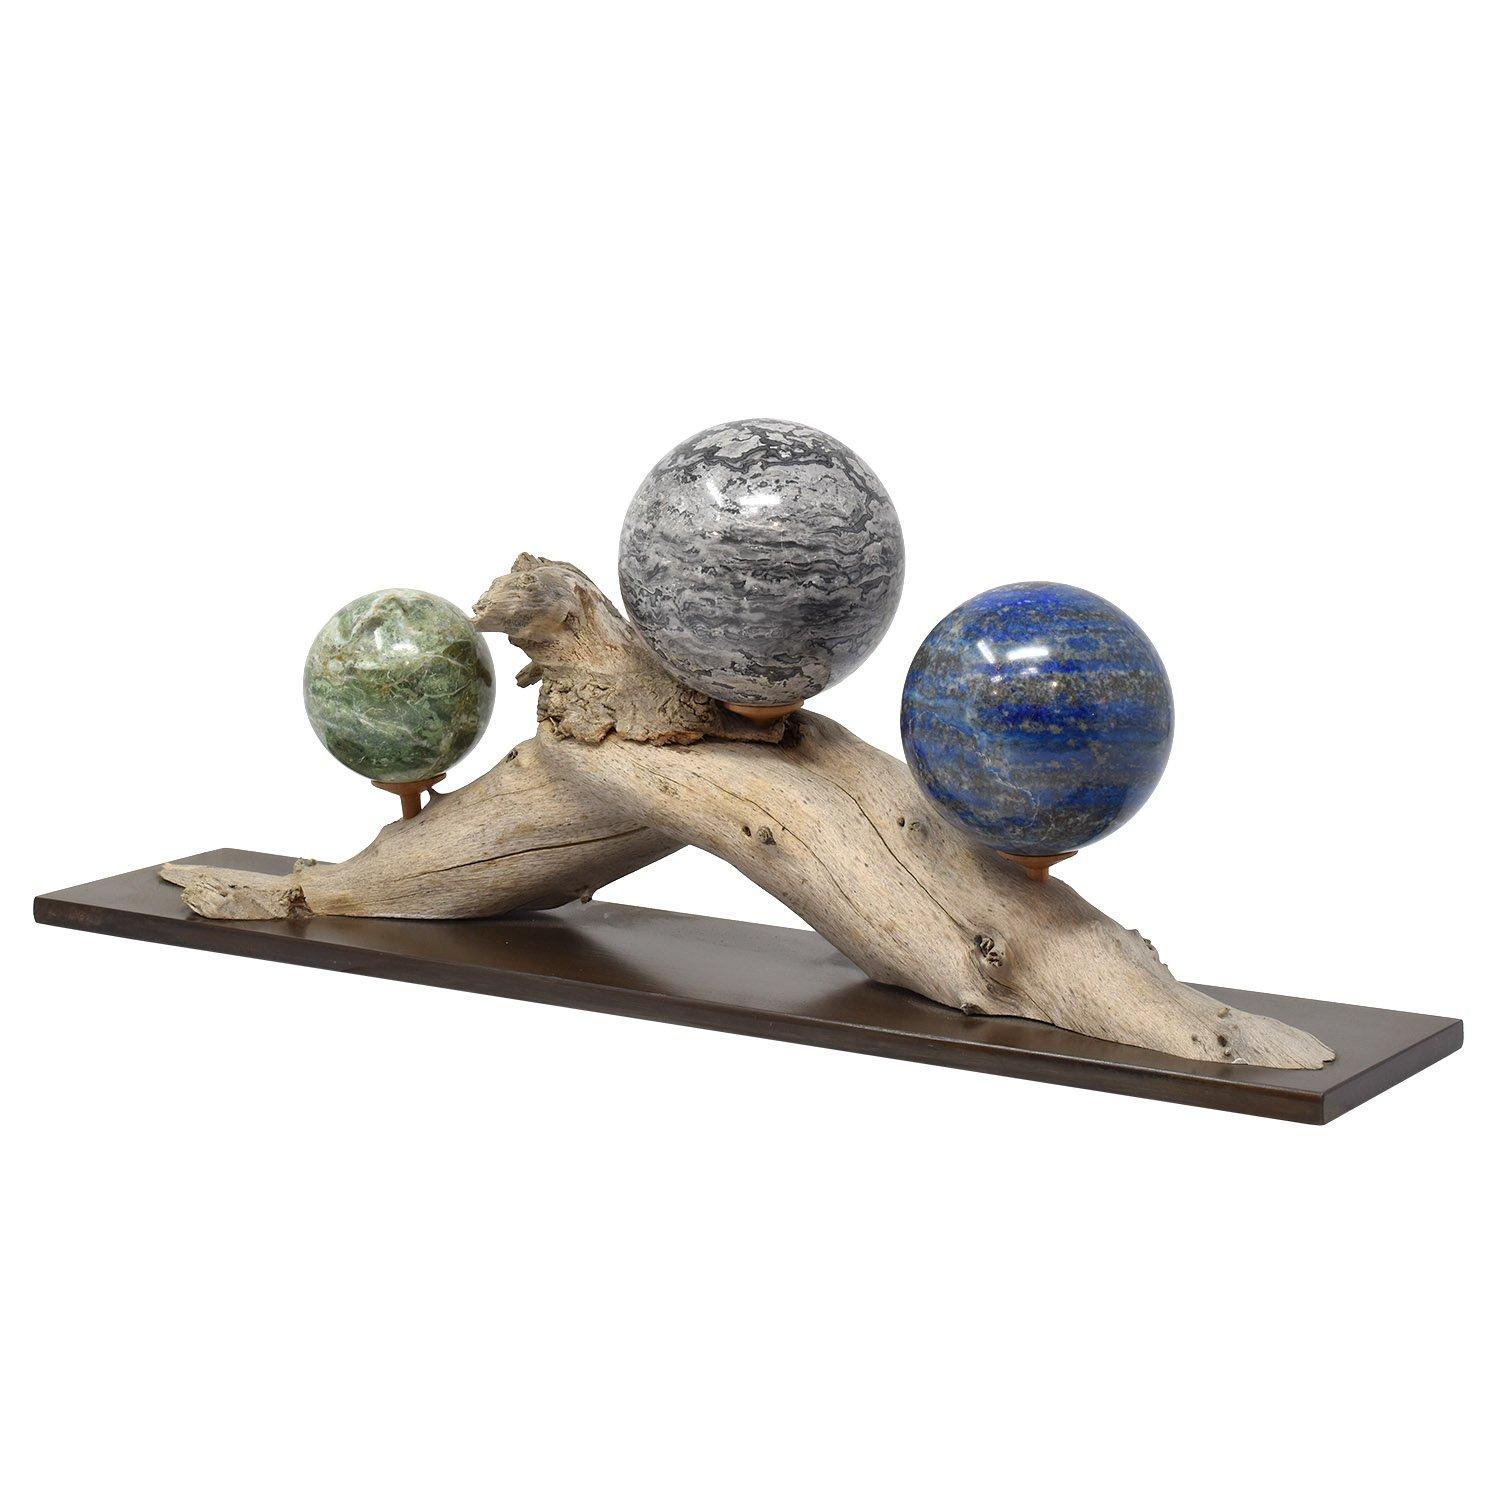 Three Mineral Spheres Custom Mounted On Organic Wood Branch

Chrysoprase, Picasso Jasper, and Lapis Lazuli
Set of 3 as pictured
Diameters from left to right: 2.25, 3.25, 3 in. / 6, 8, 7.5 cm

This sculpture juxtaposes the rich colors and textures of